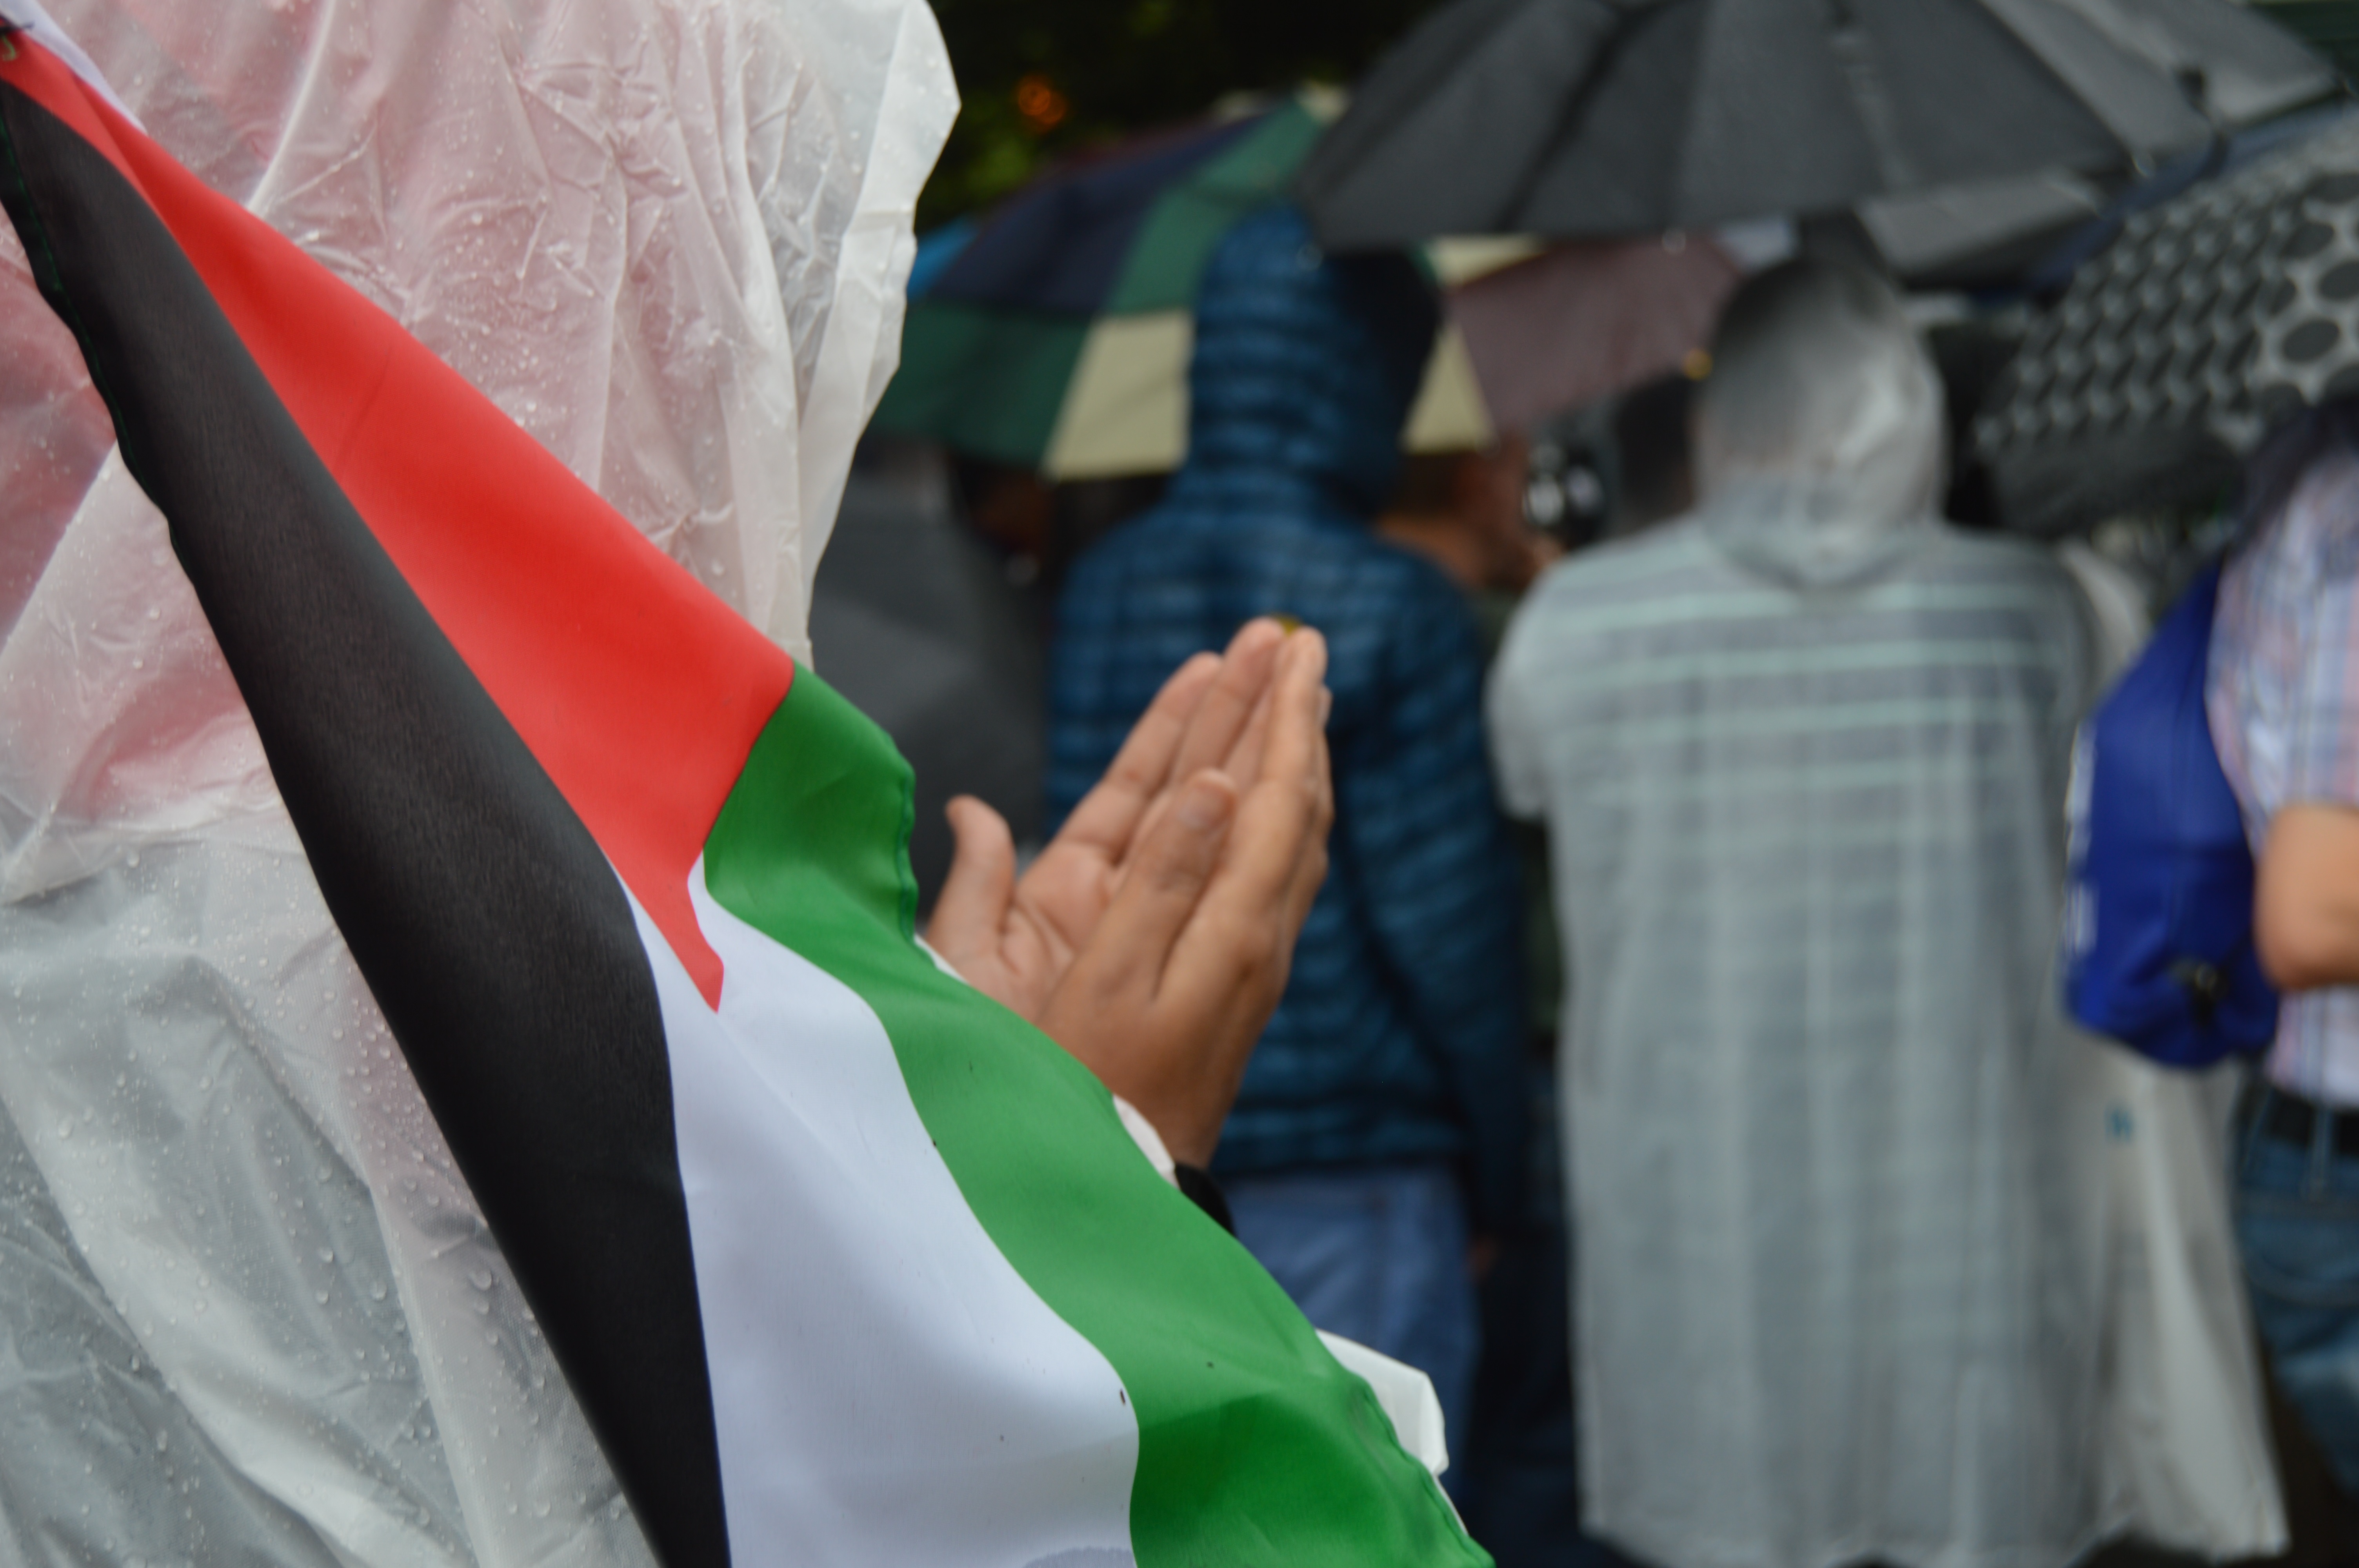 A young woman prays while holding a Palestinian flag during a prayer service outside the Israeli embassy in Washington D.C. on Friday, July 28, 2017.